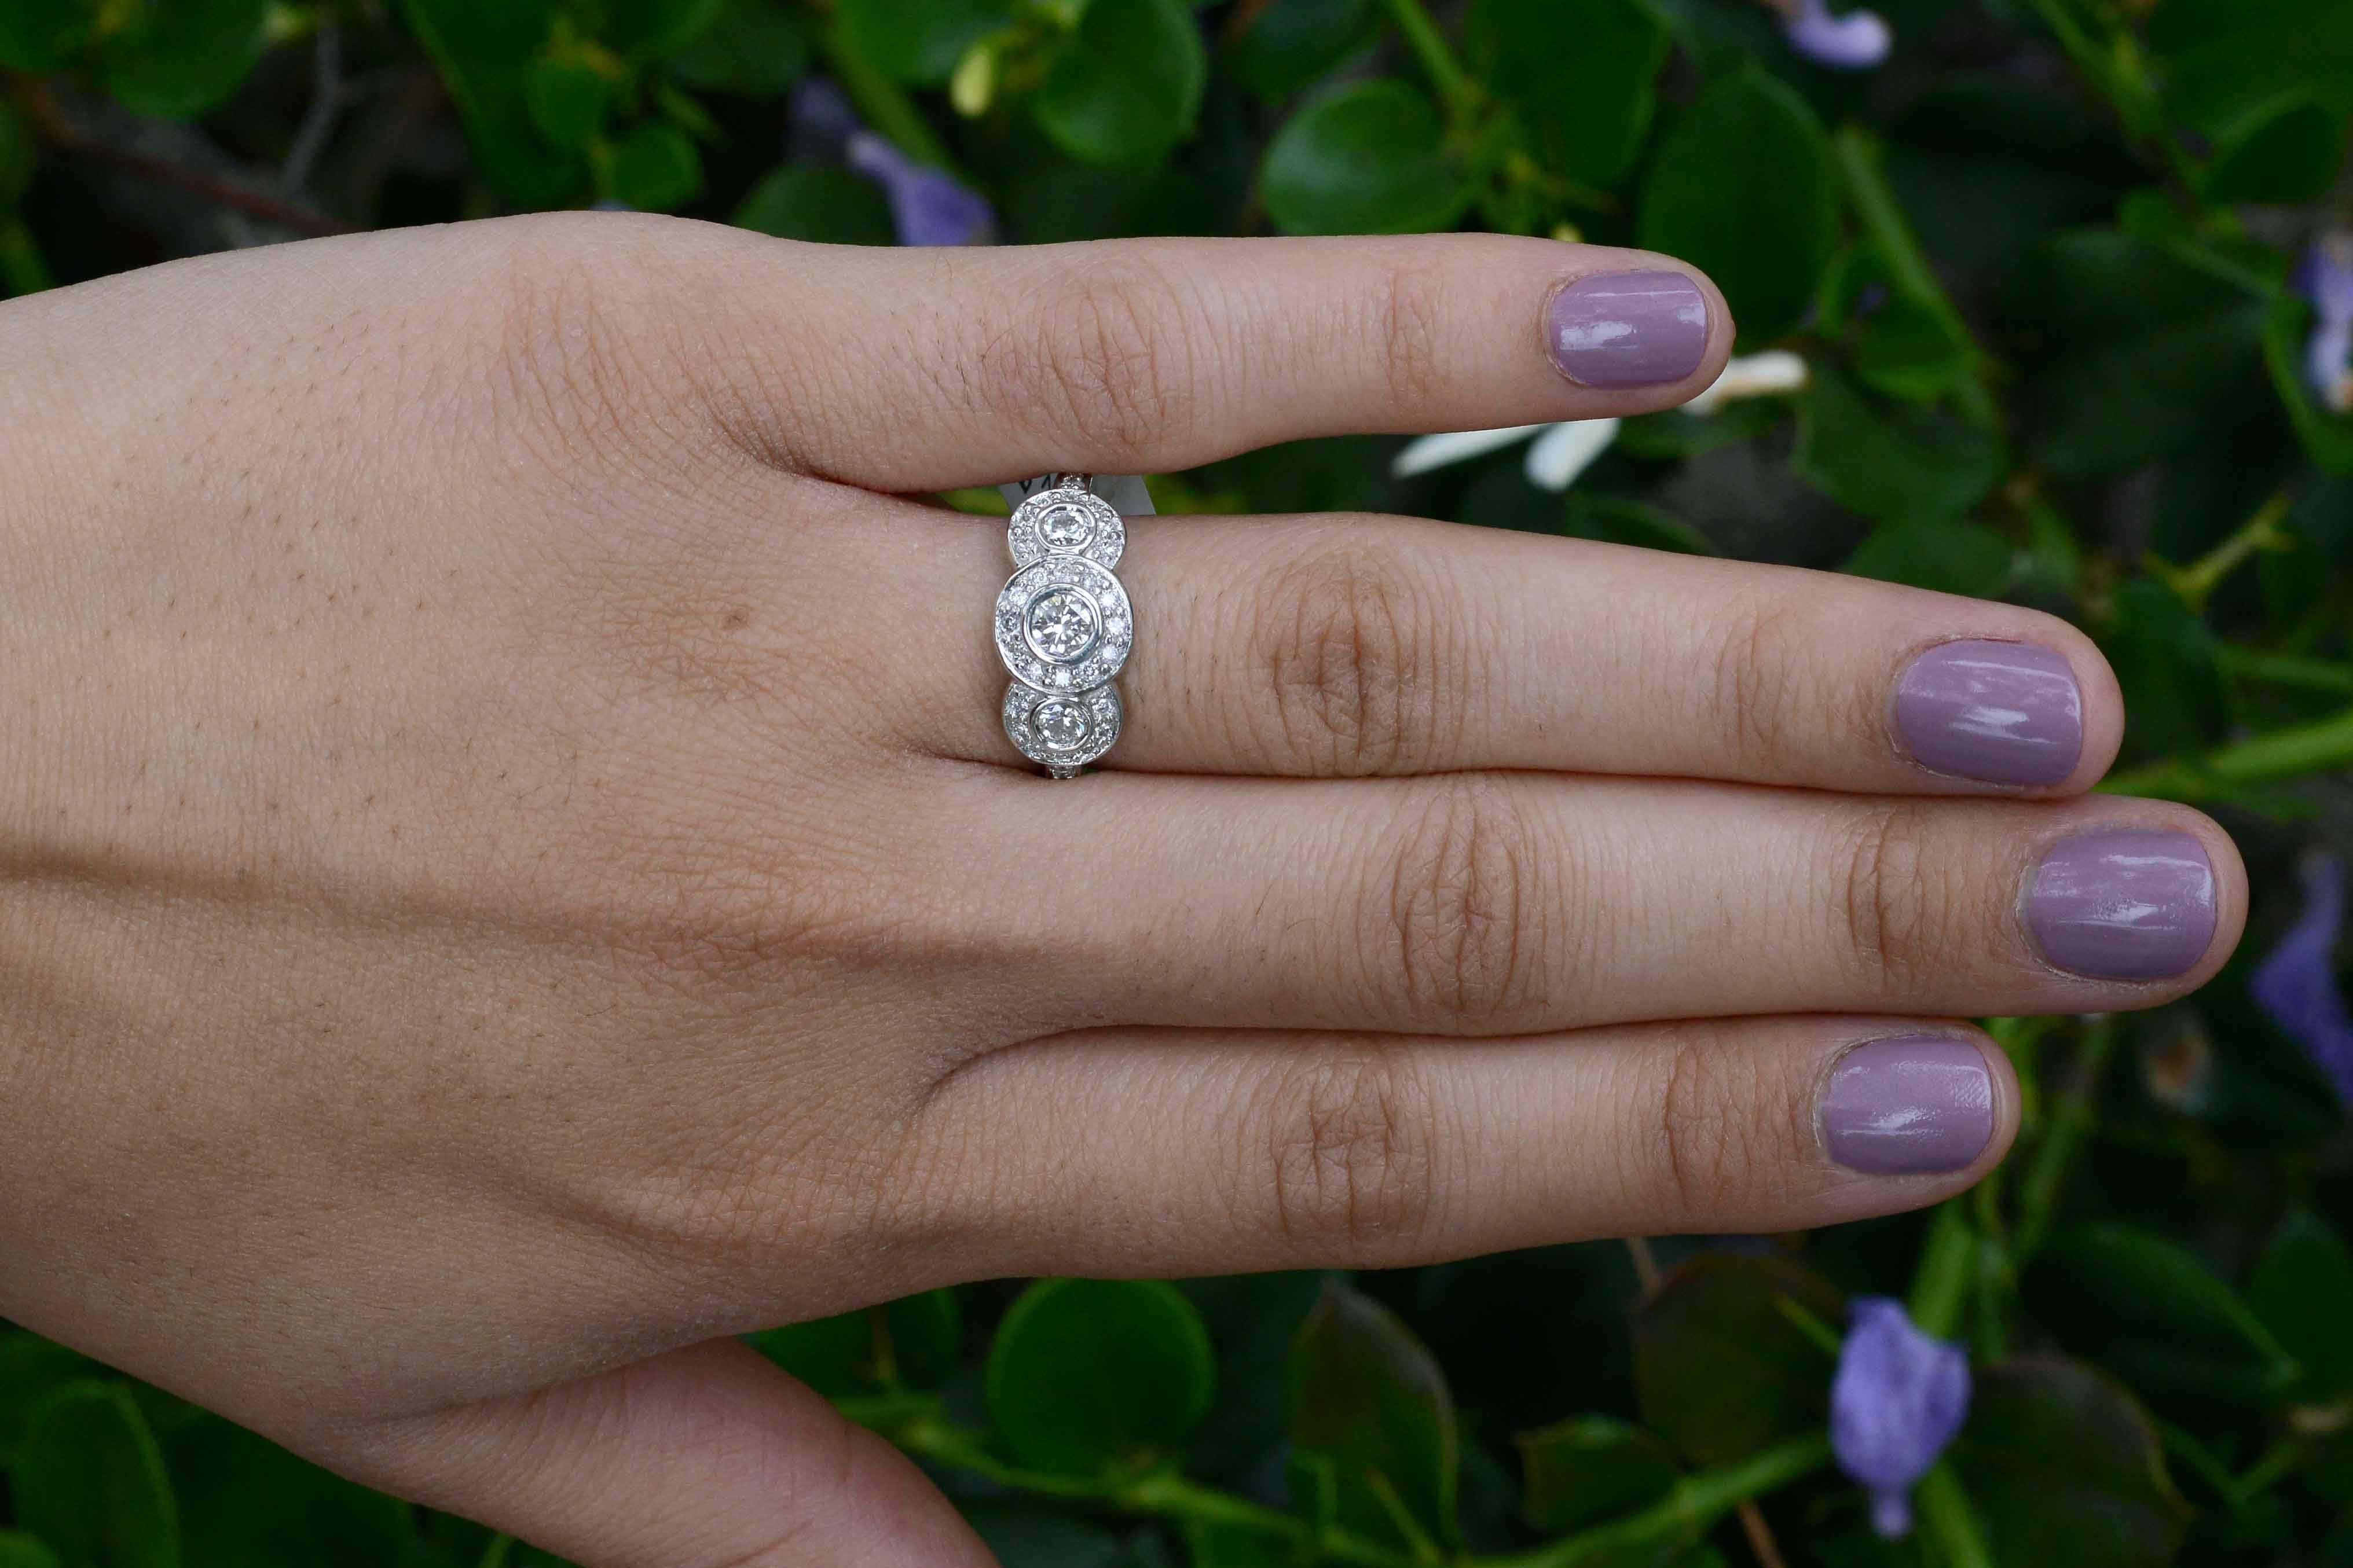 Why have only 1 halo when you can have 3? This vintage 3 stone trinity diamond engagement ring really dazzles. With nearly one carat total weight (0.89), an outstanding value with a huge amount of finger coverage and a substantial feel. The low on